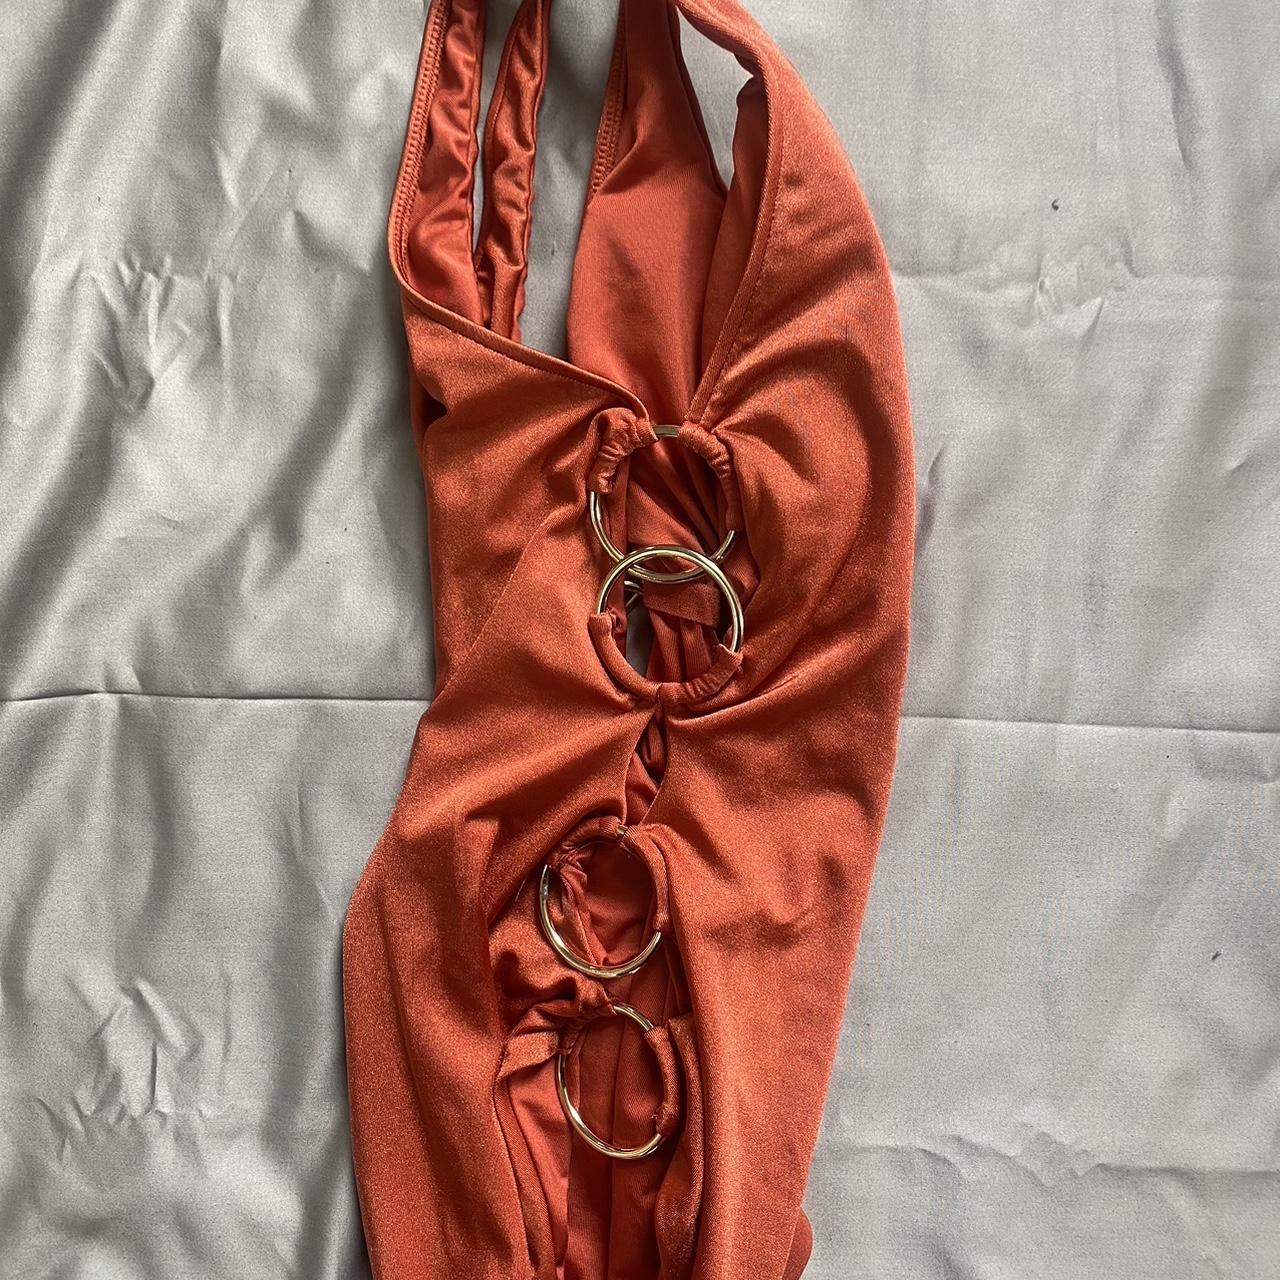 Calzedonia Women's Red and Orange Swimsuit-one-piece (3)